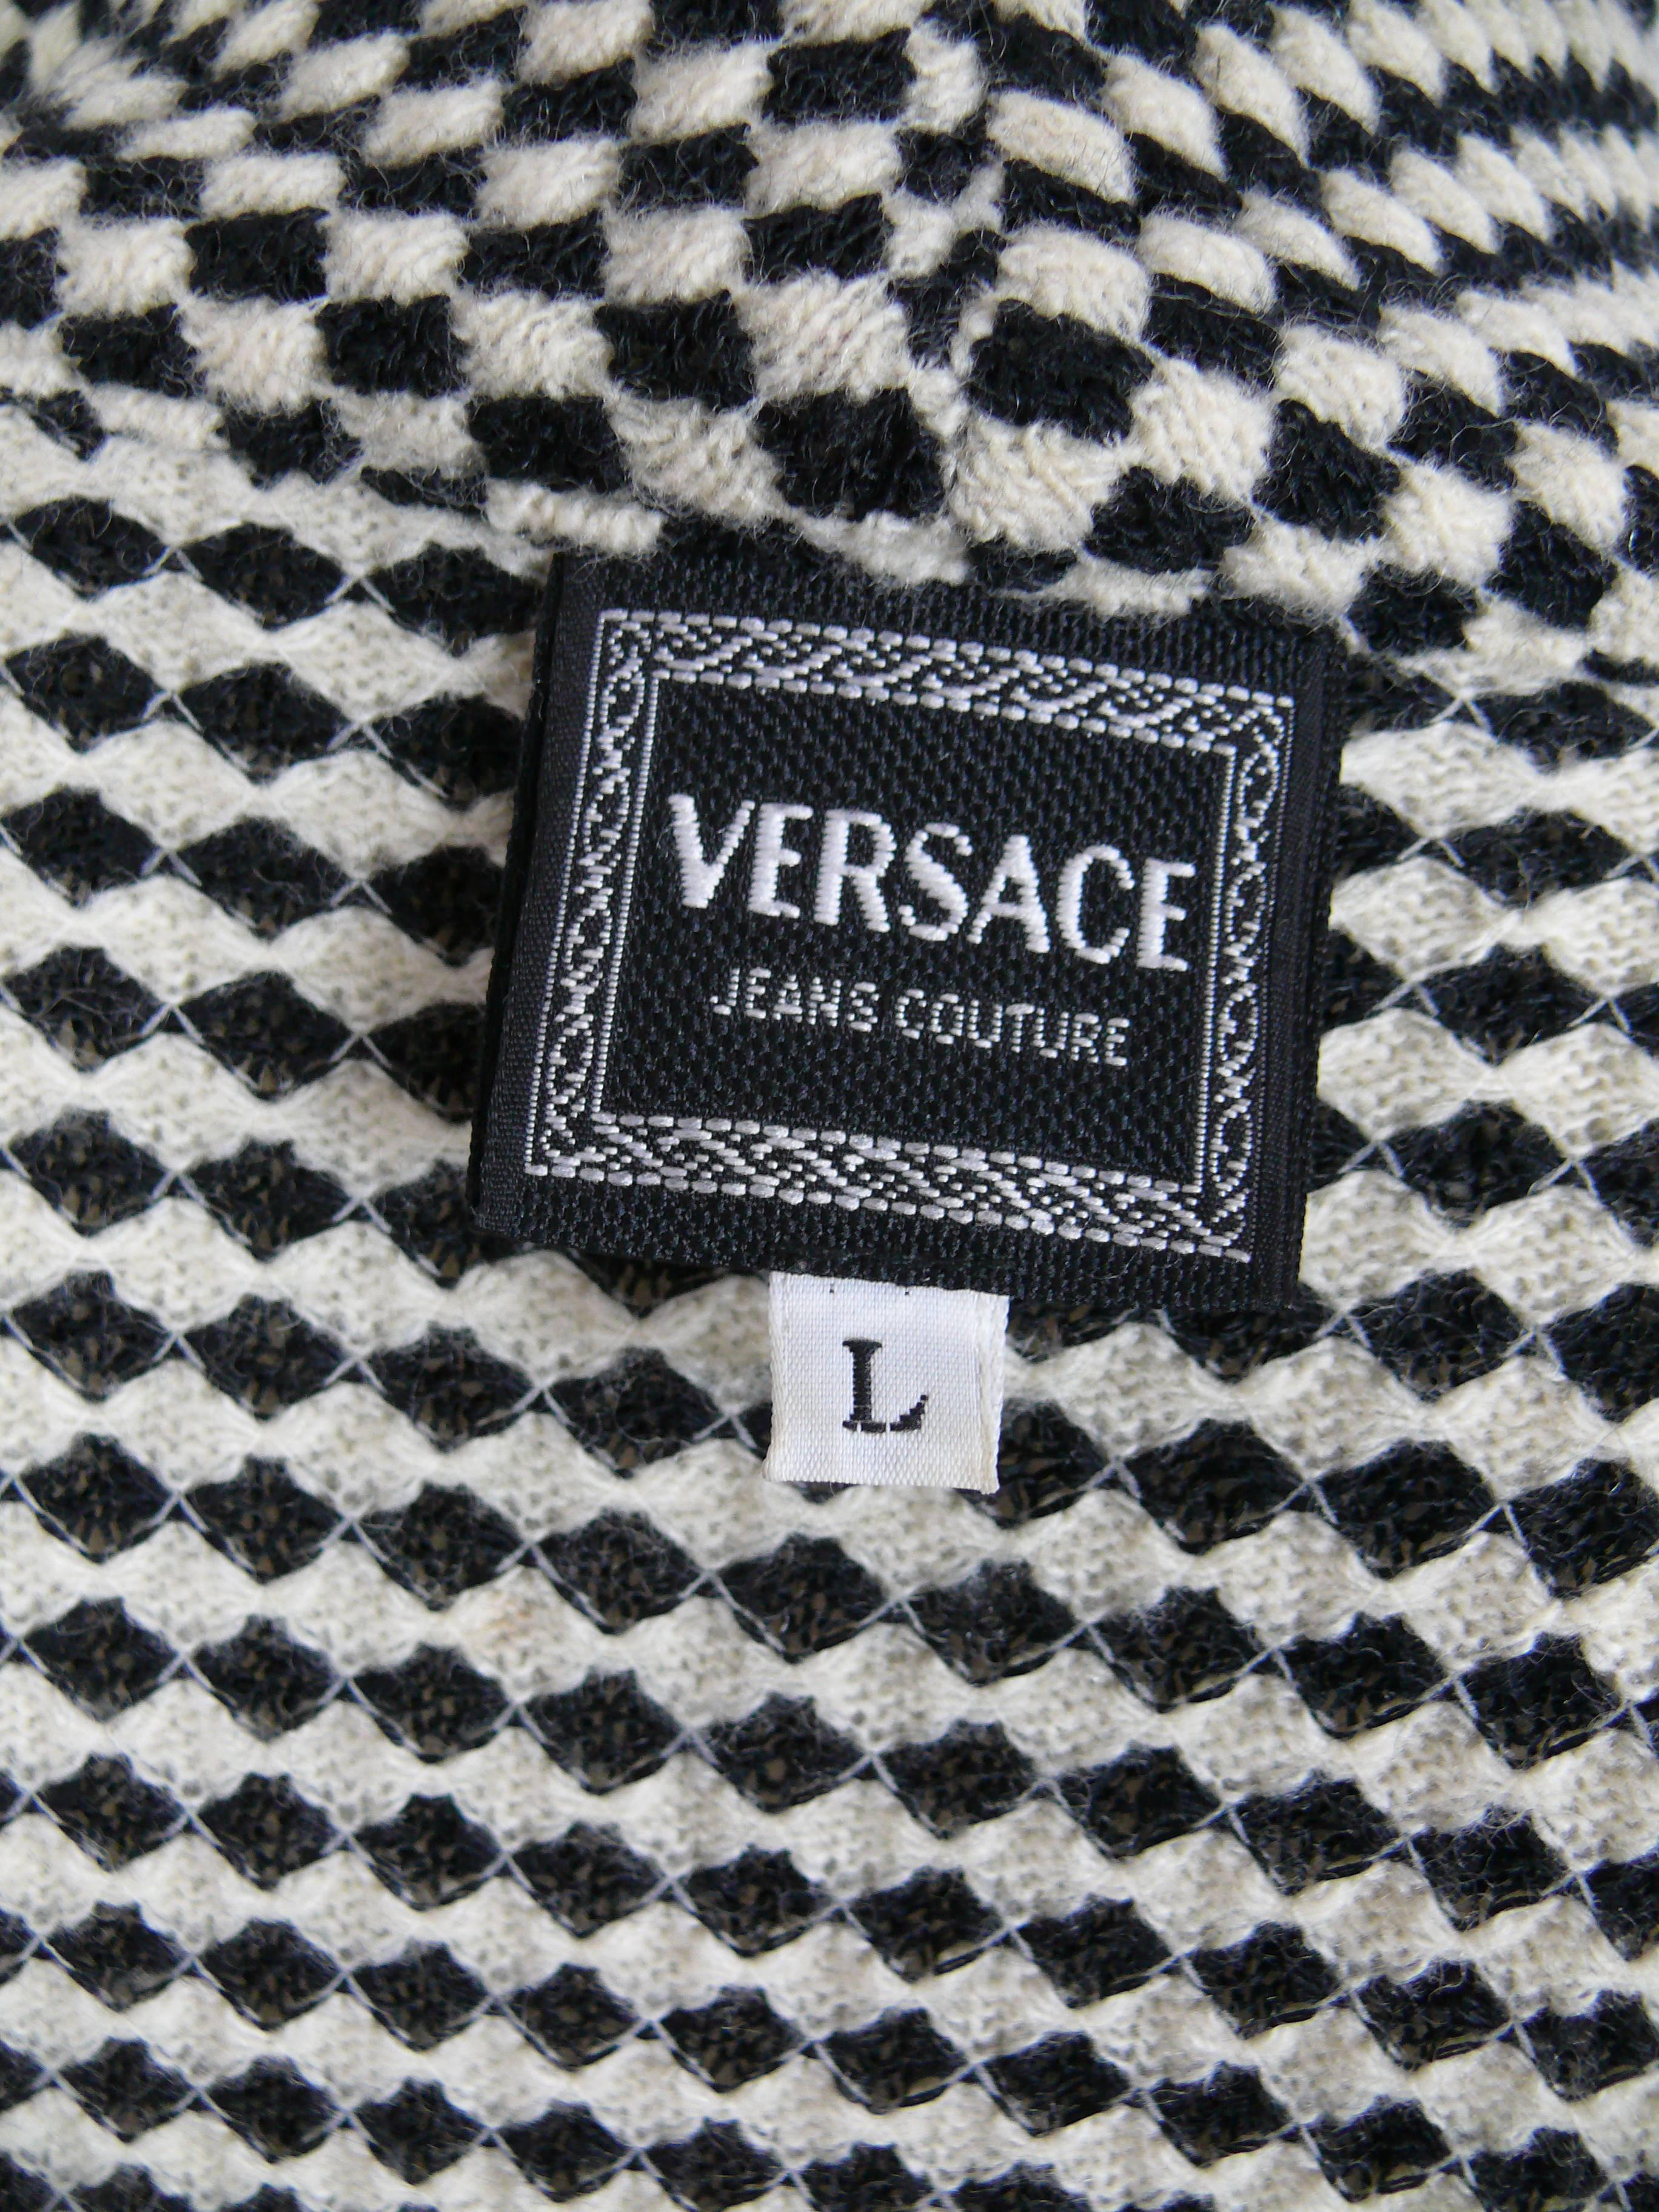 gianni versace couture label